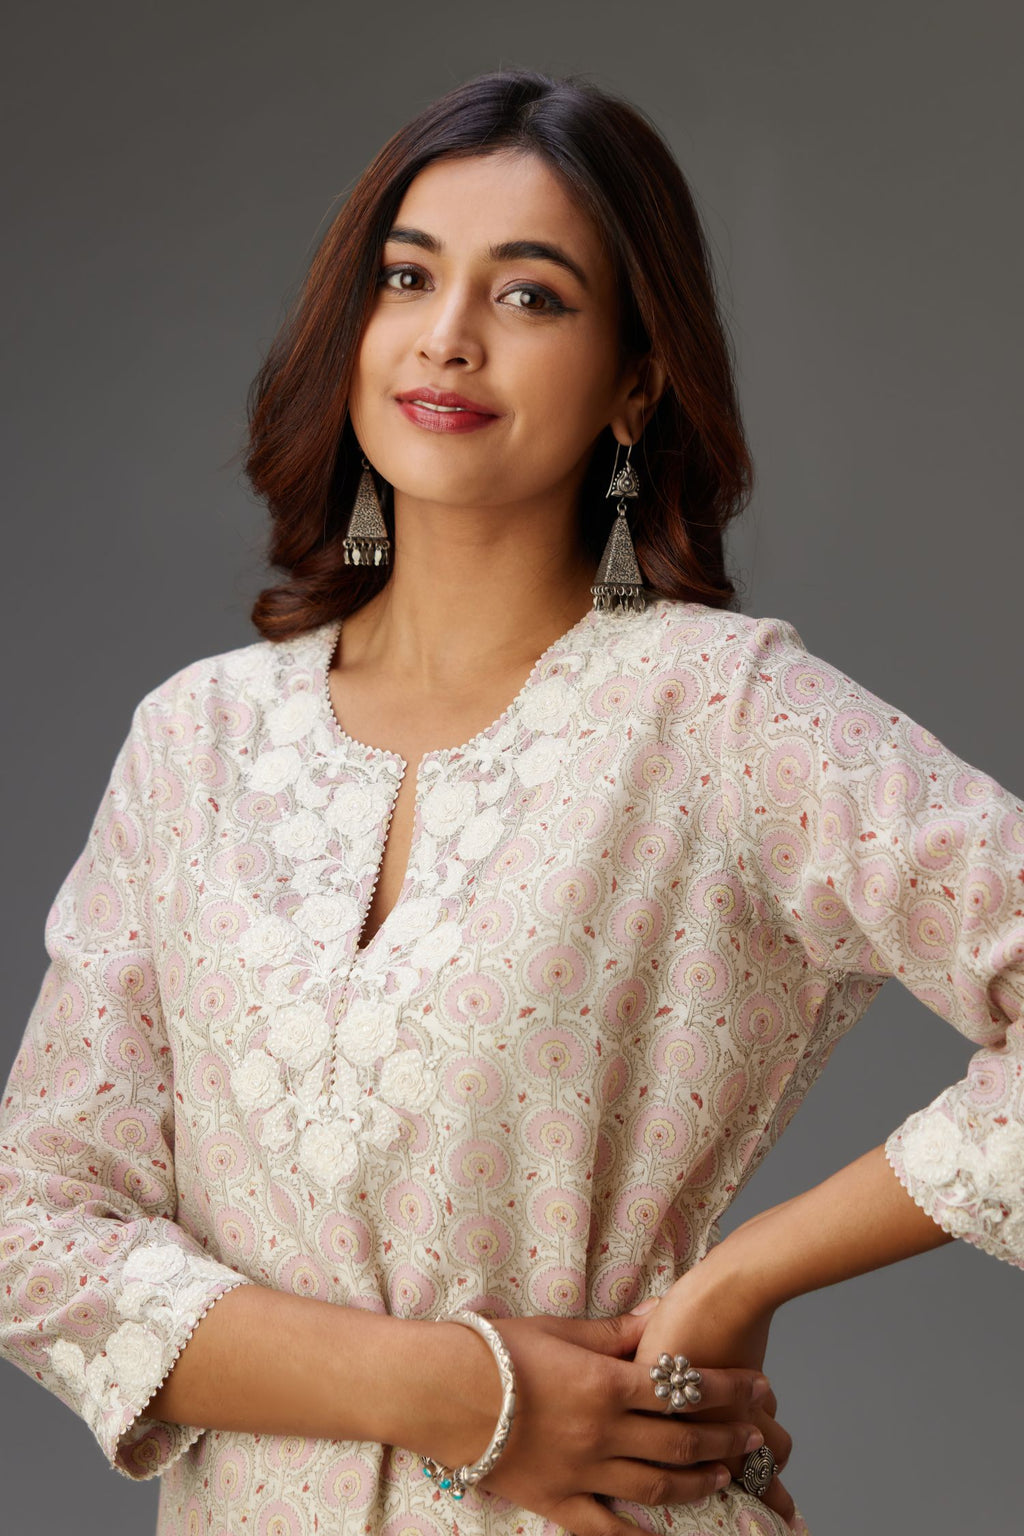 Pink and grey Silk Chanderi hand-block printed kurta set with appliqué embroidery, highlighted with lace and sequins.